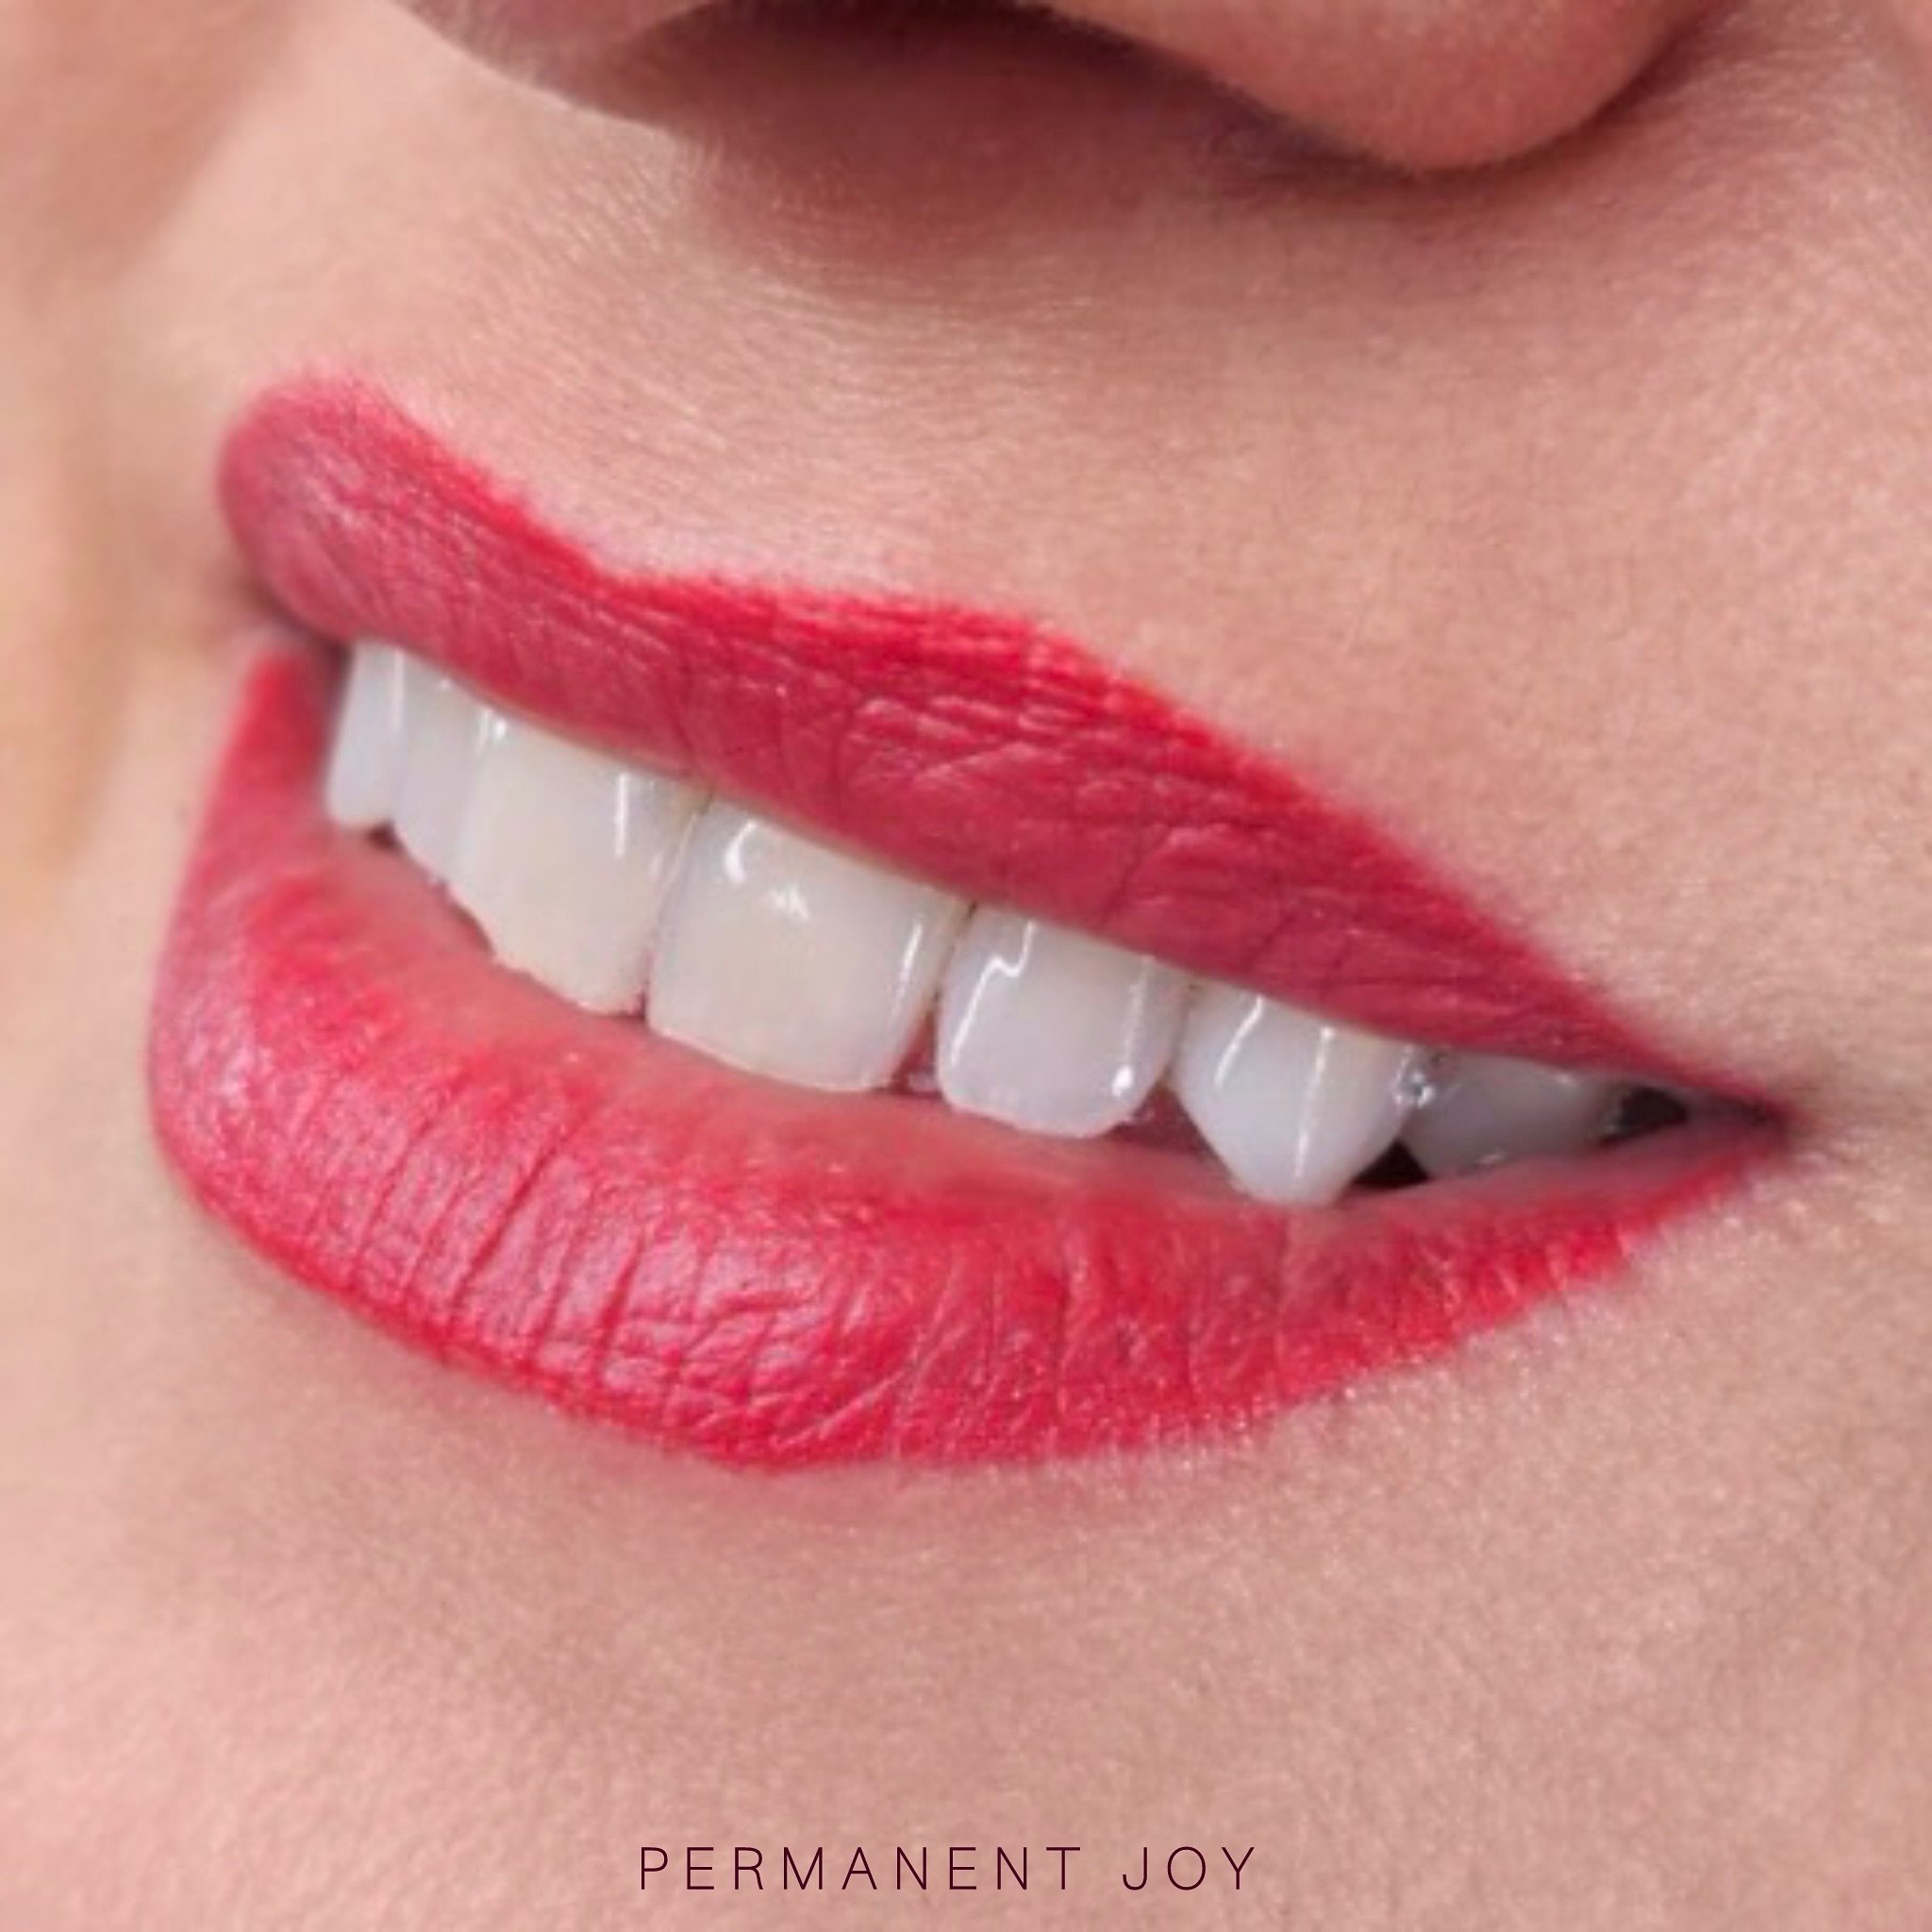 💗 True Natural Lip Blush Revealed! HEALED WORK 💗

Take a look at these smiling lips, now flaunting the ultimate natural lipstick look that will grace her life for the next four years! This lovely shade not only enhances but will loyally serve her, 